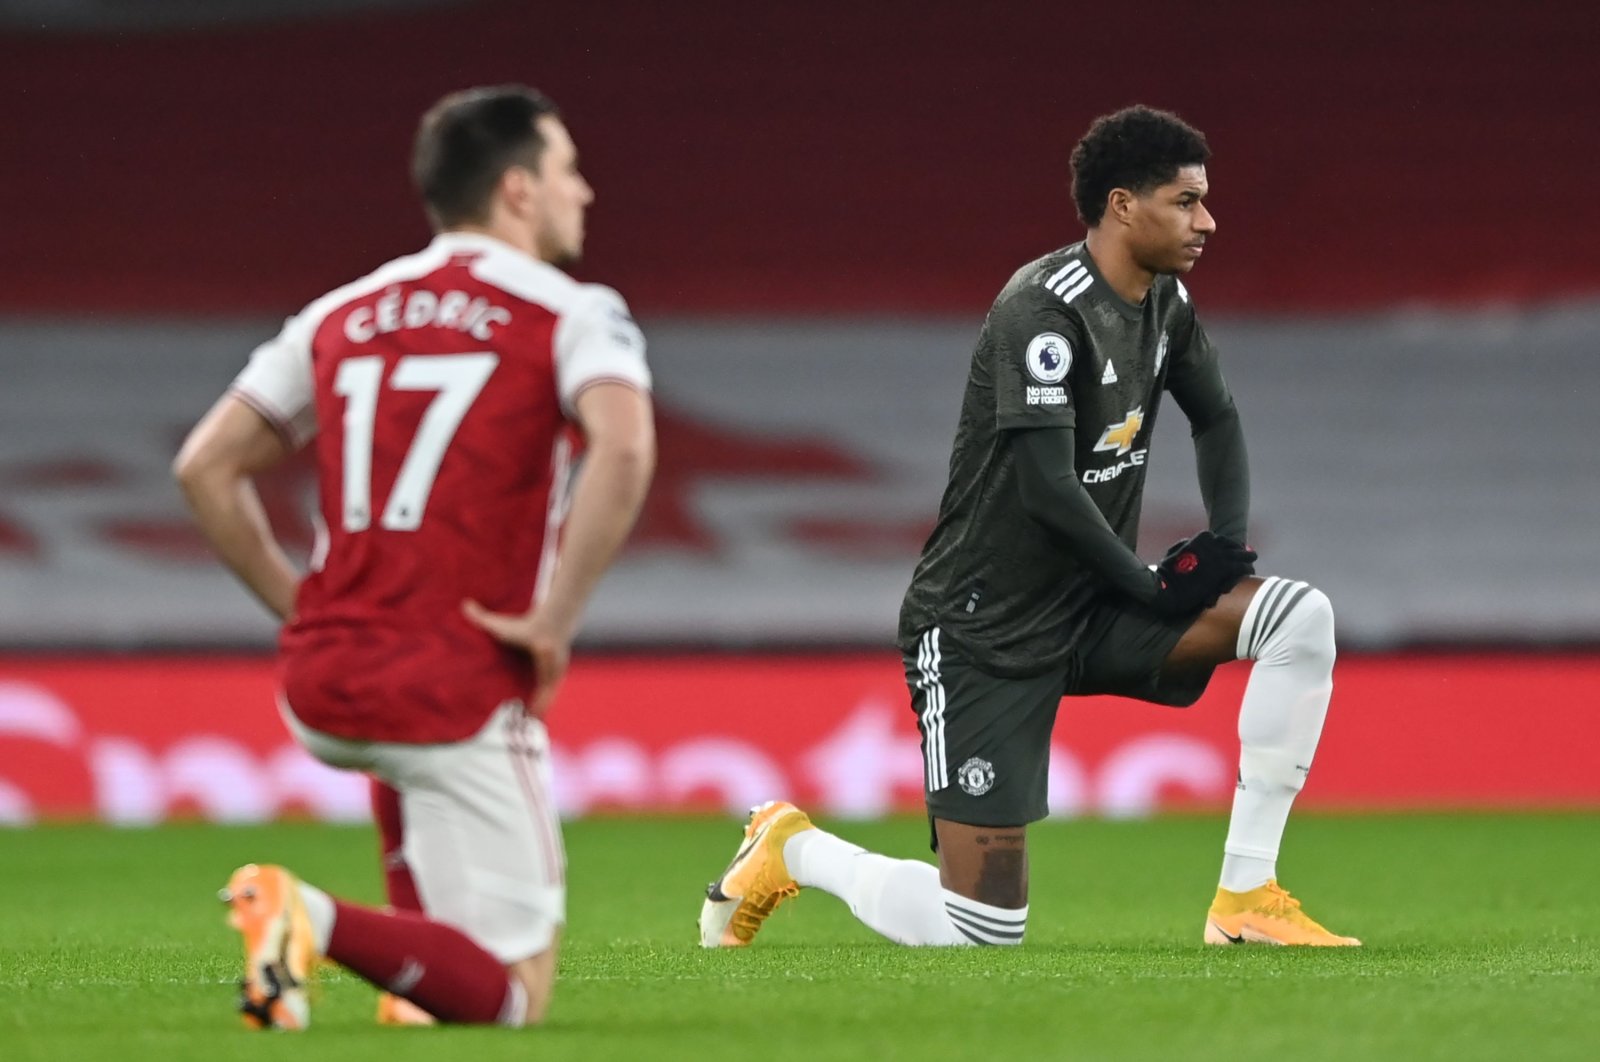 Manchester United's English striker Marcus Rashford (R) 'takes a knee' in support of the No Room For Racism campaign ahead of the Premier League match against Arsenal at the Emirates Stadium, London, Jan. 30, 2021. (AFP Photo)